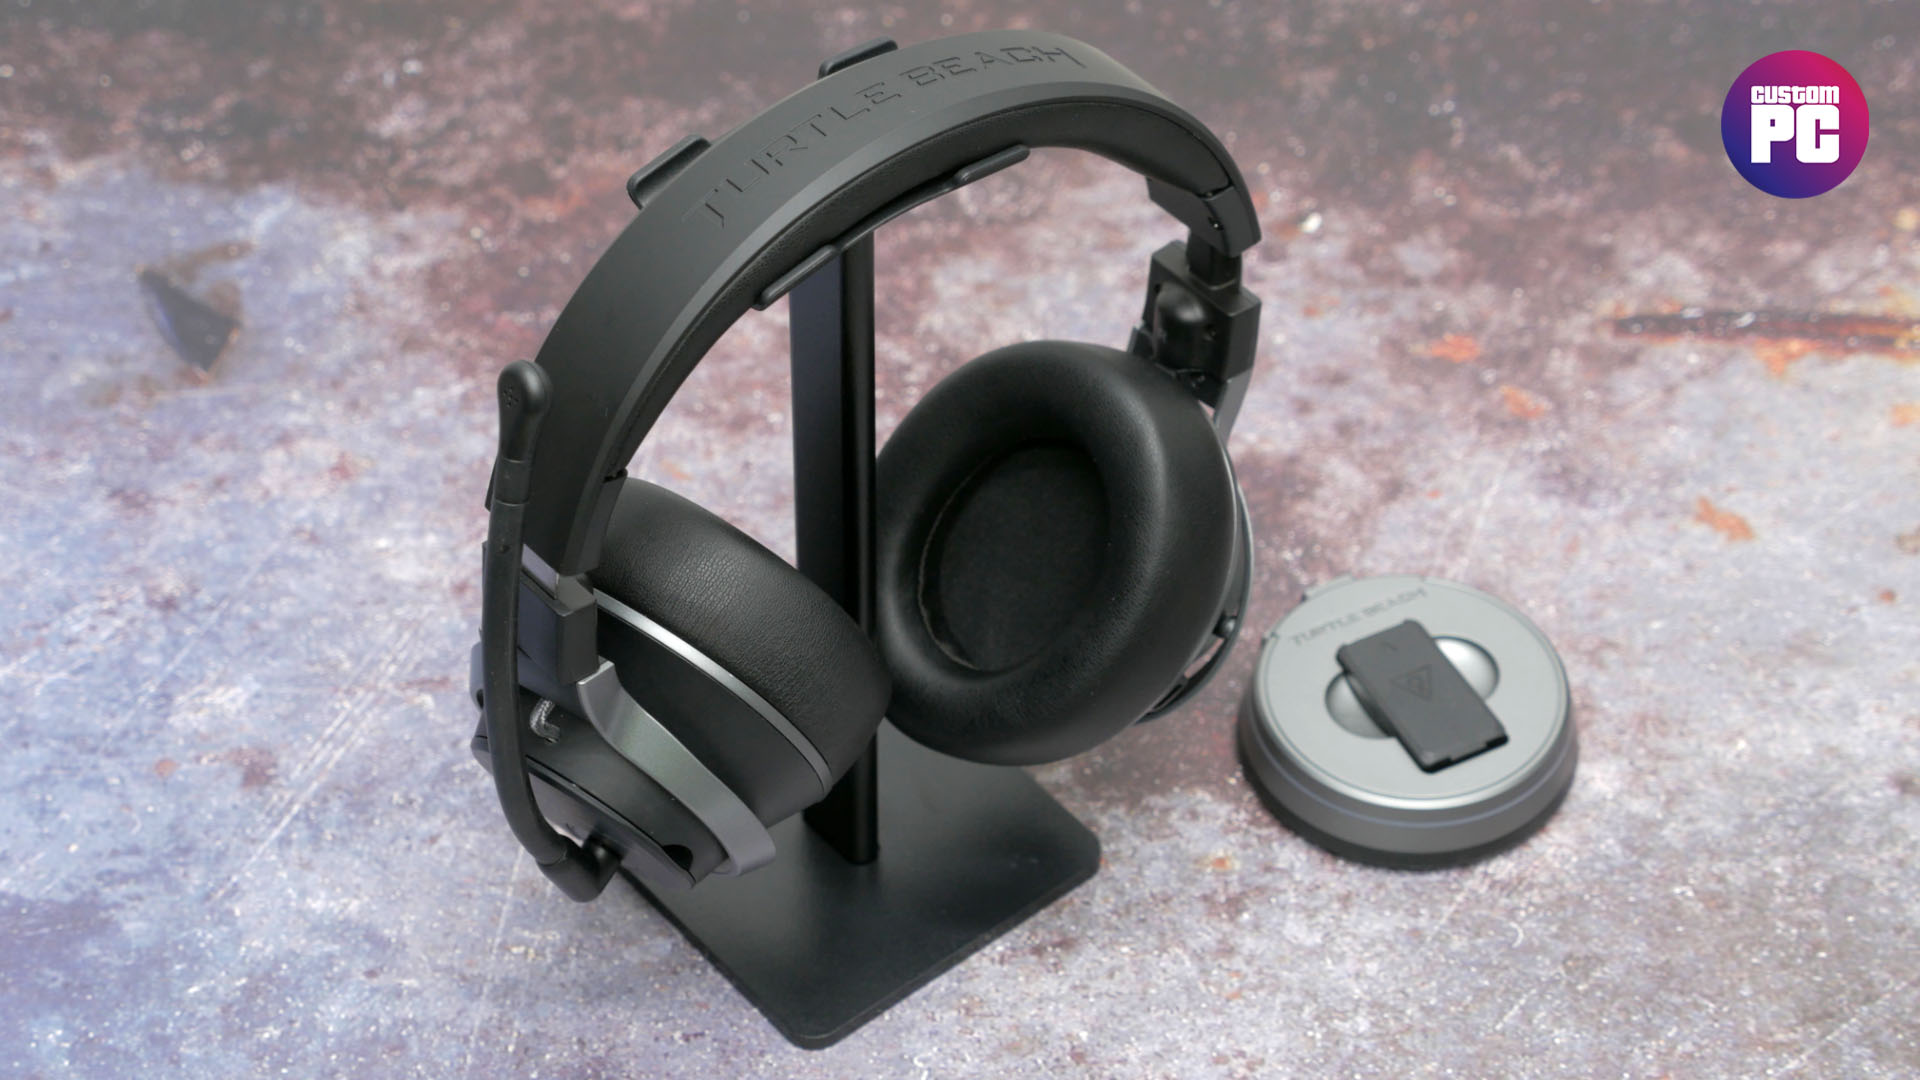 Turtle Beach Stealth Pro review 02